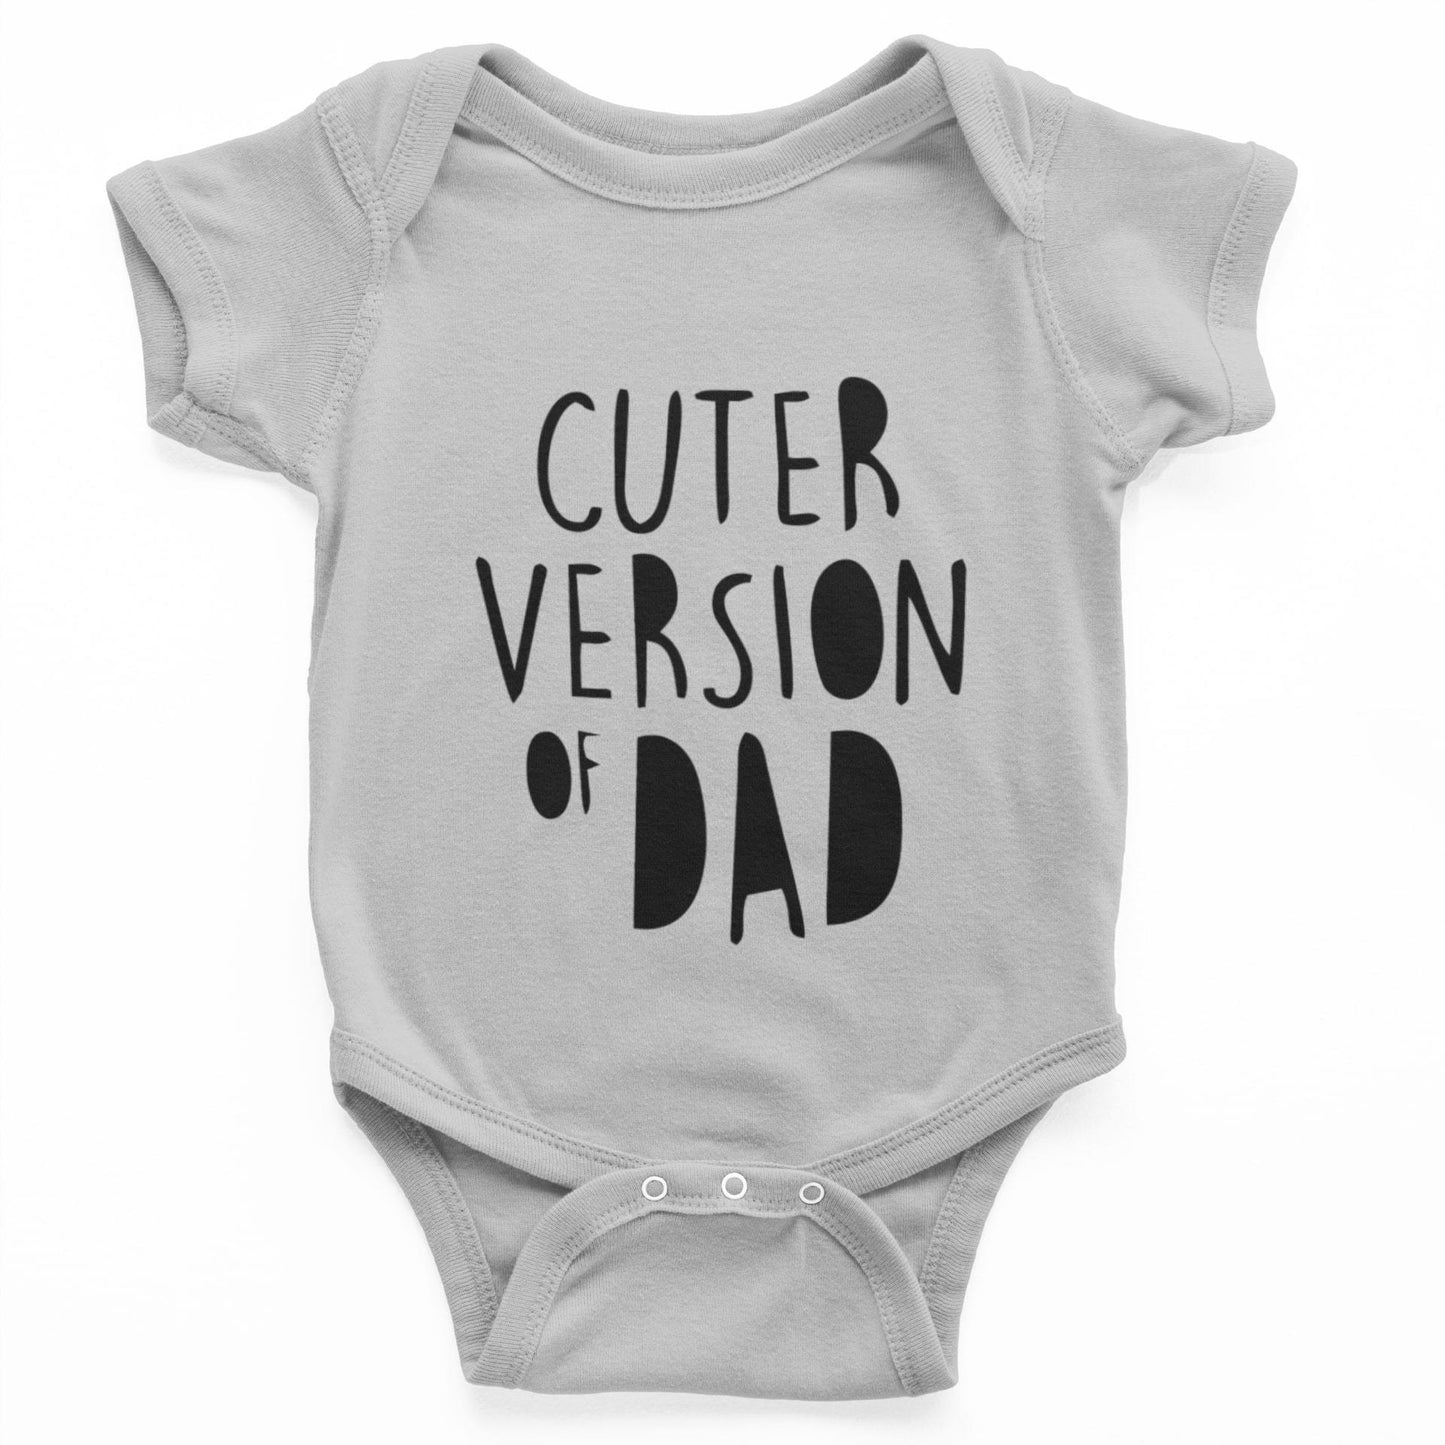 thelegalgang,Cuter Version of Dad Rompers for Babies,.